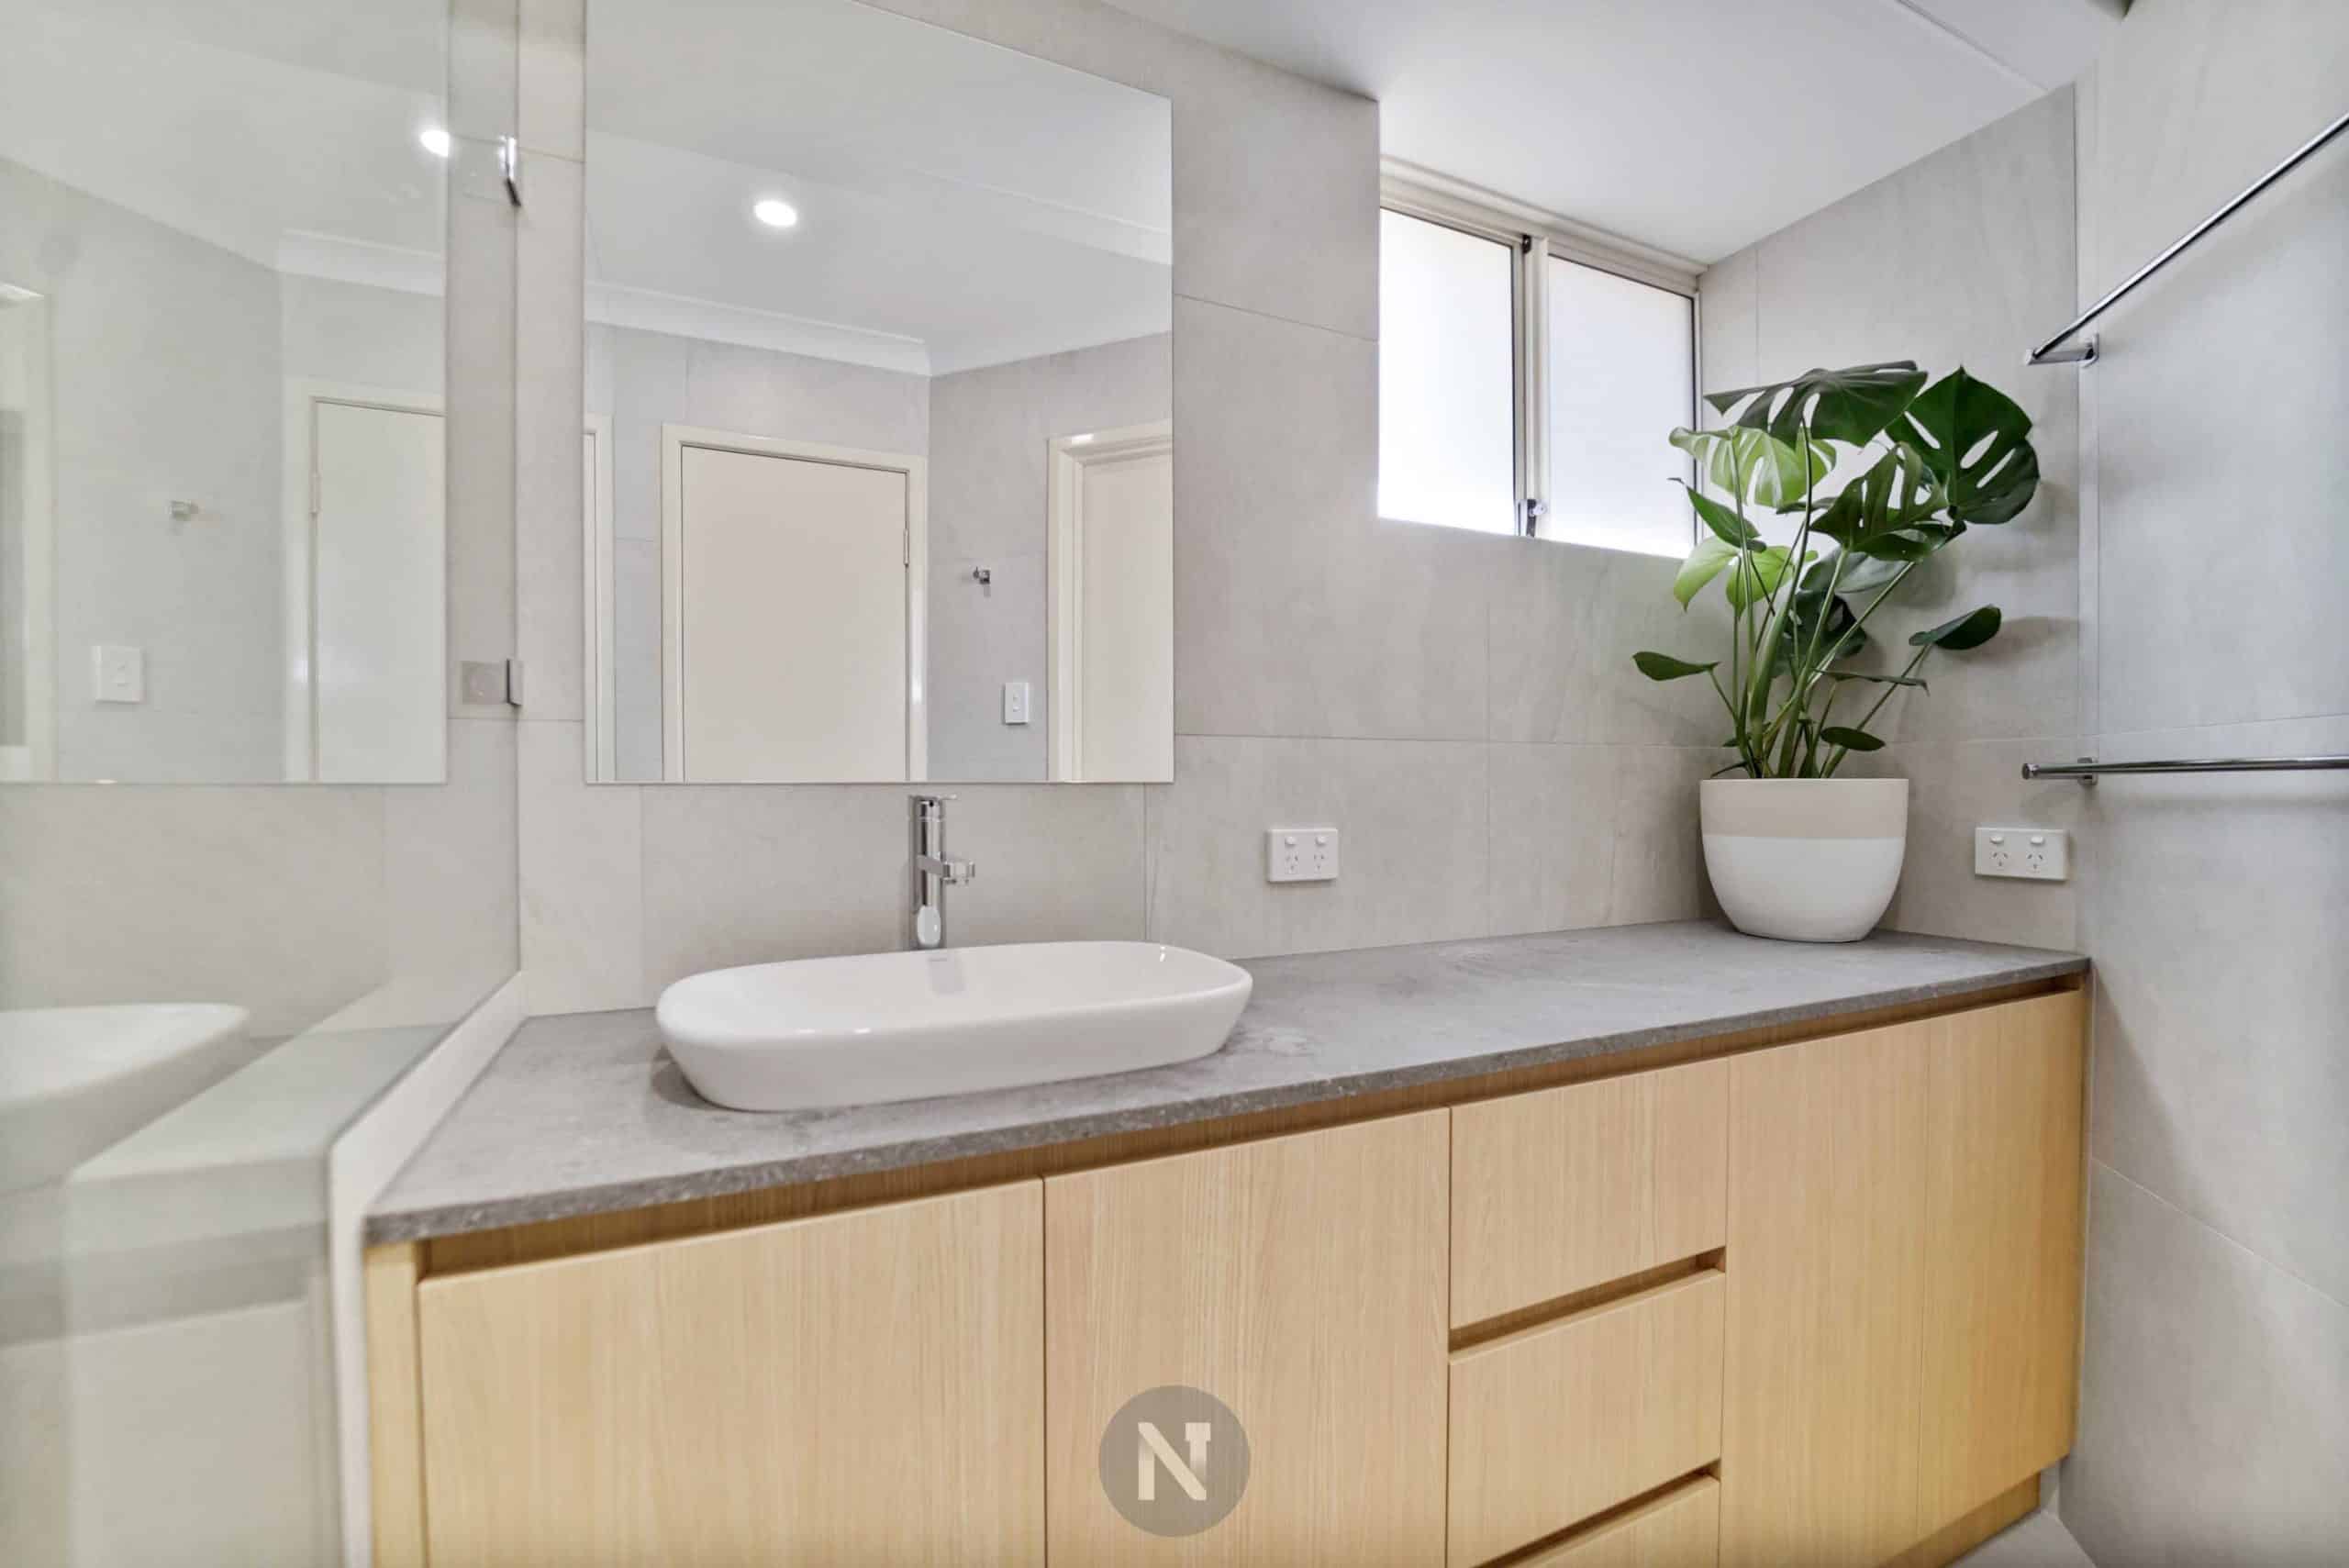 Woodvale- Bathrooms Renovations Project - Navigate Bathrooms